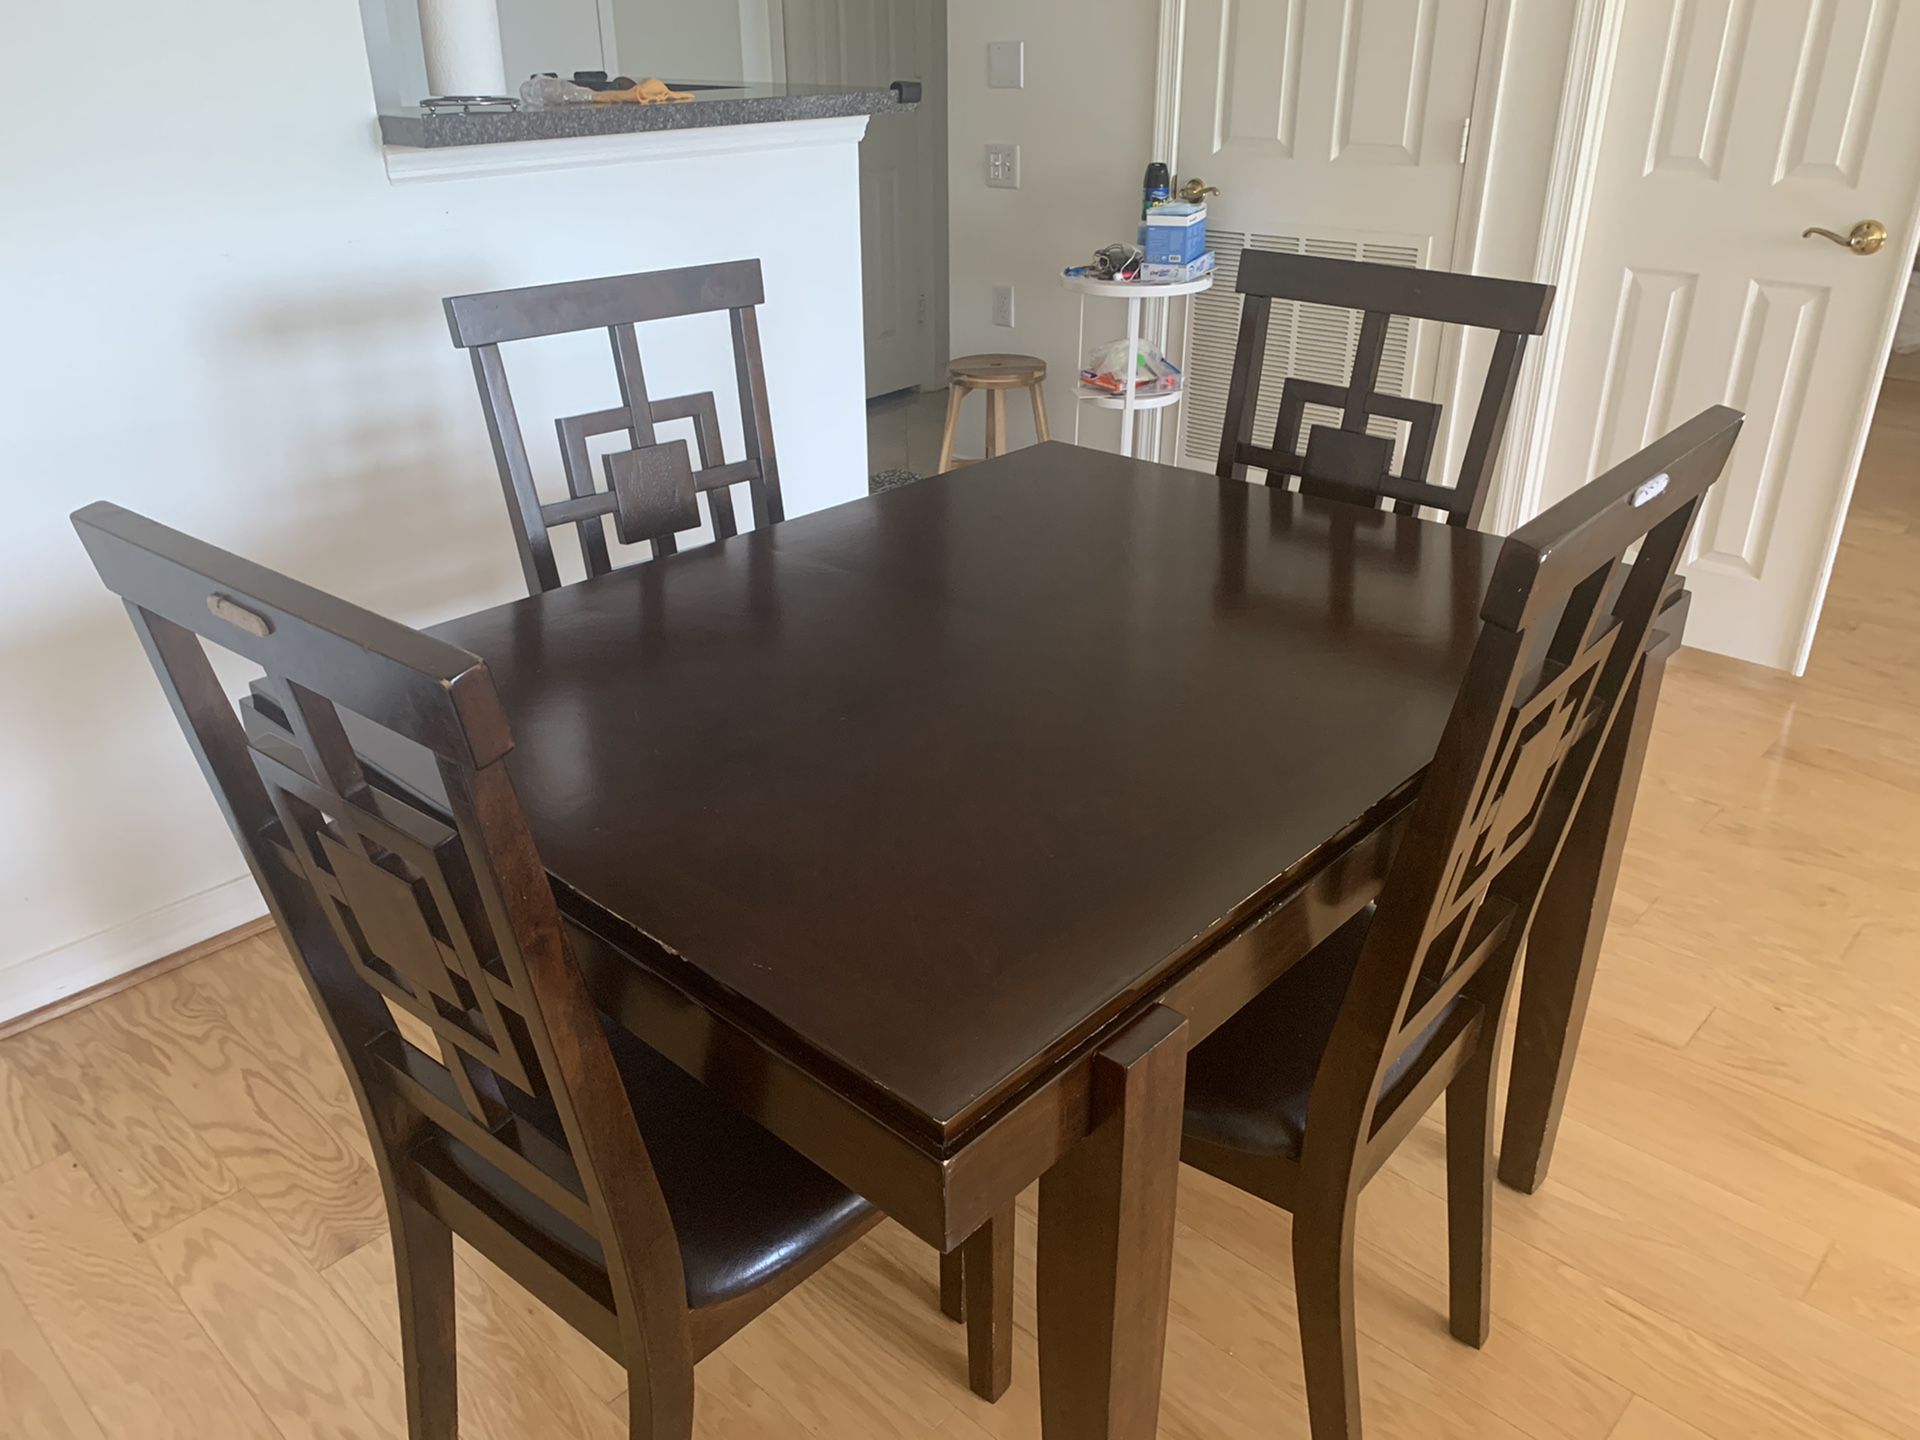 Dining table with four padded chairs